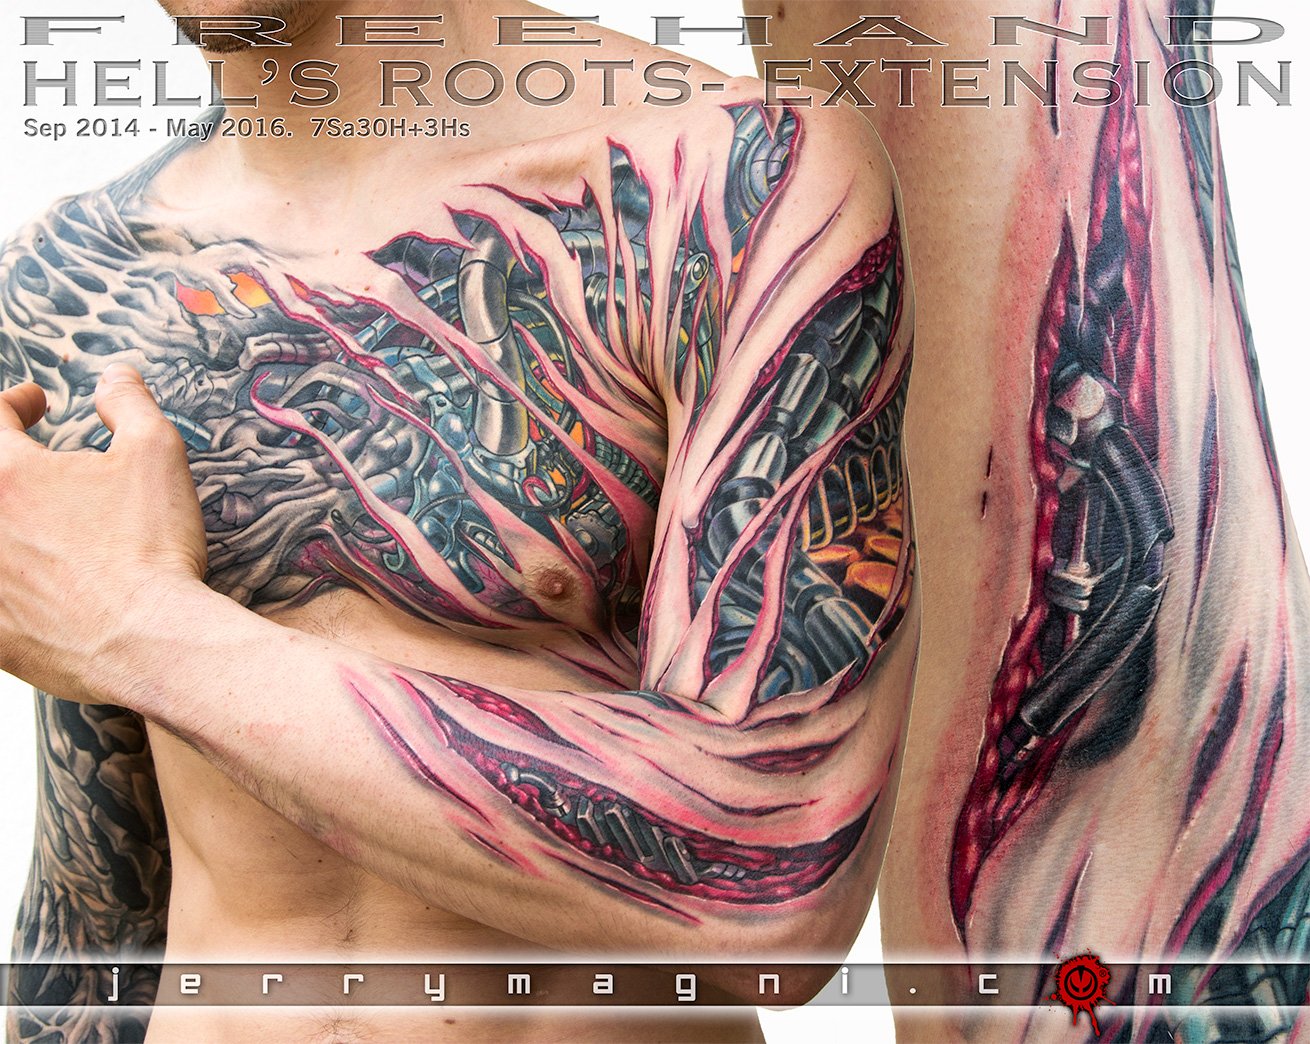 What are Biomechanical Tattoos  Remington Tattoo Parlor